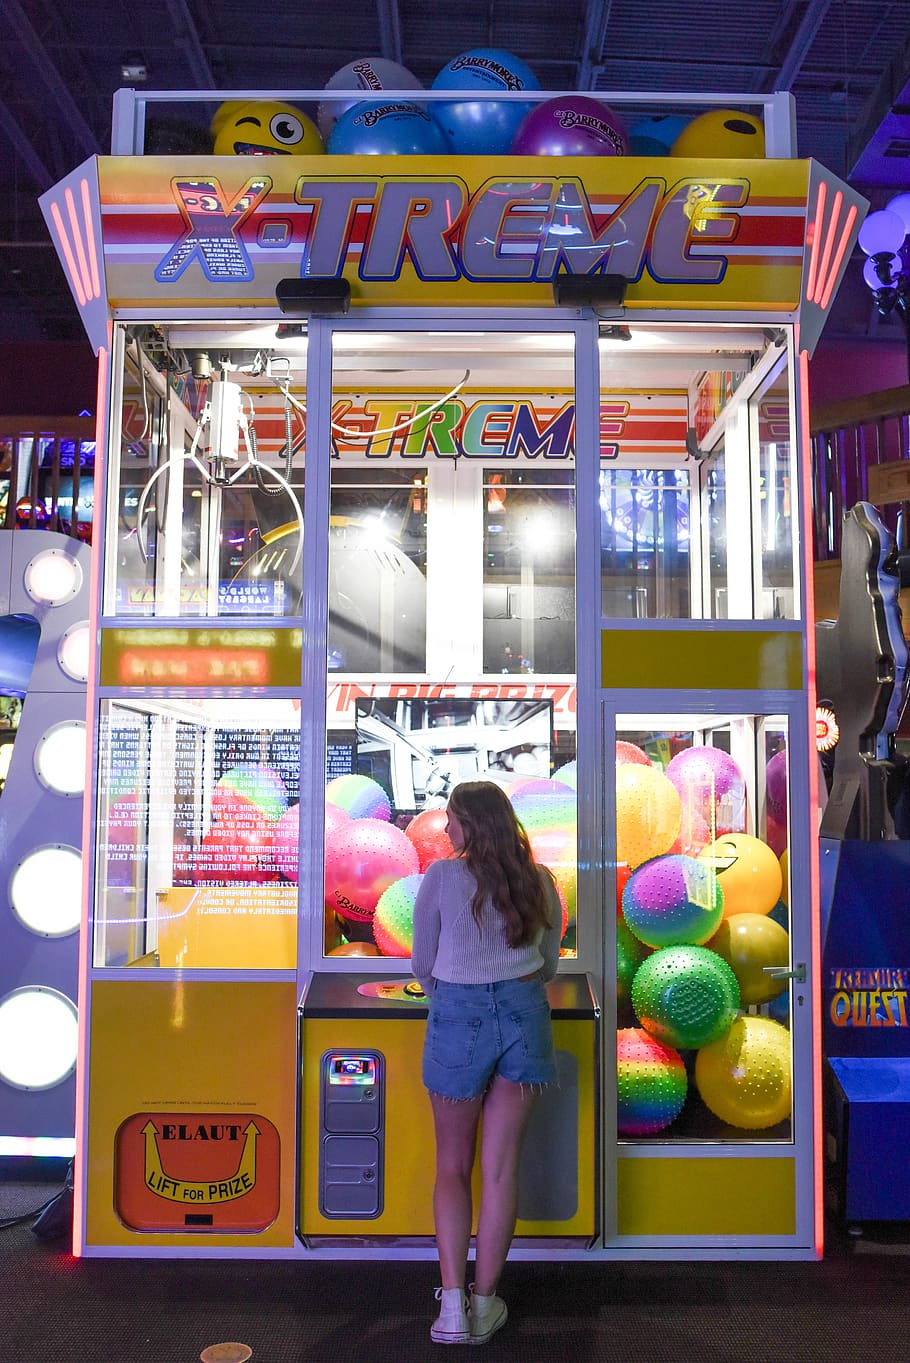 Woman Standing in Front of X-treme Arcade Machine, arcade game